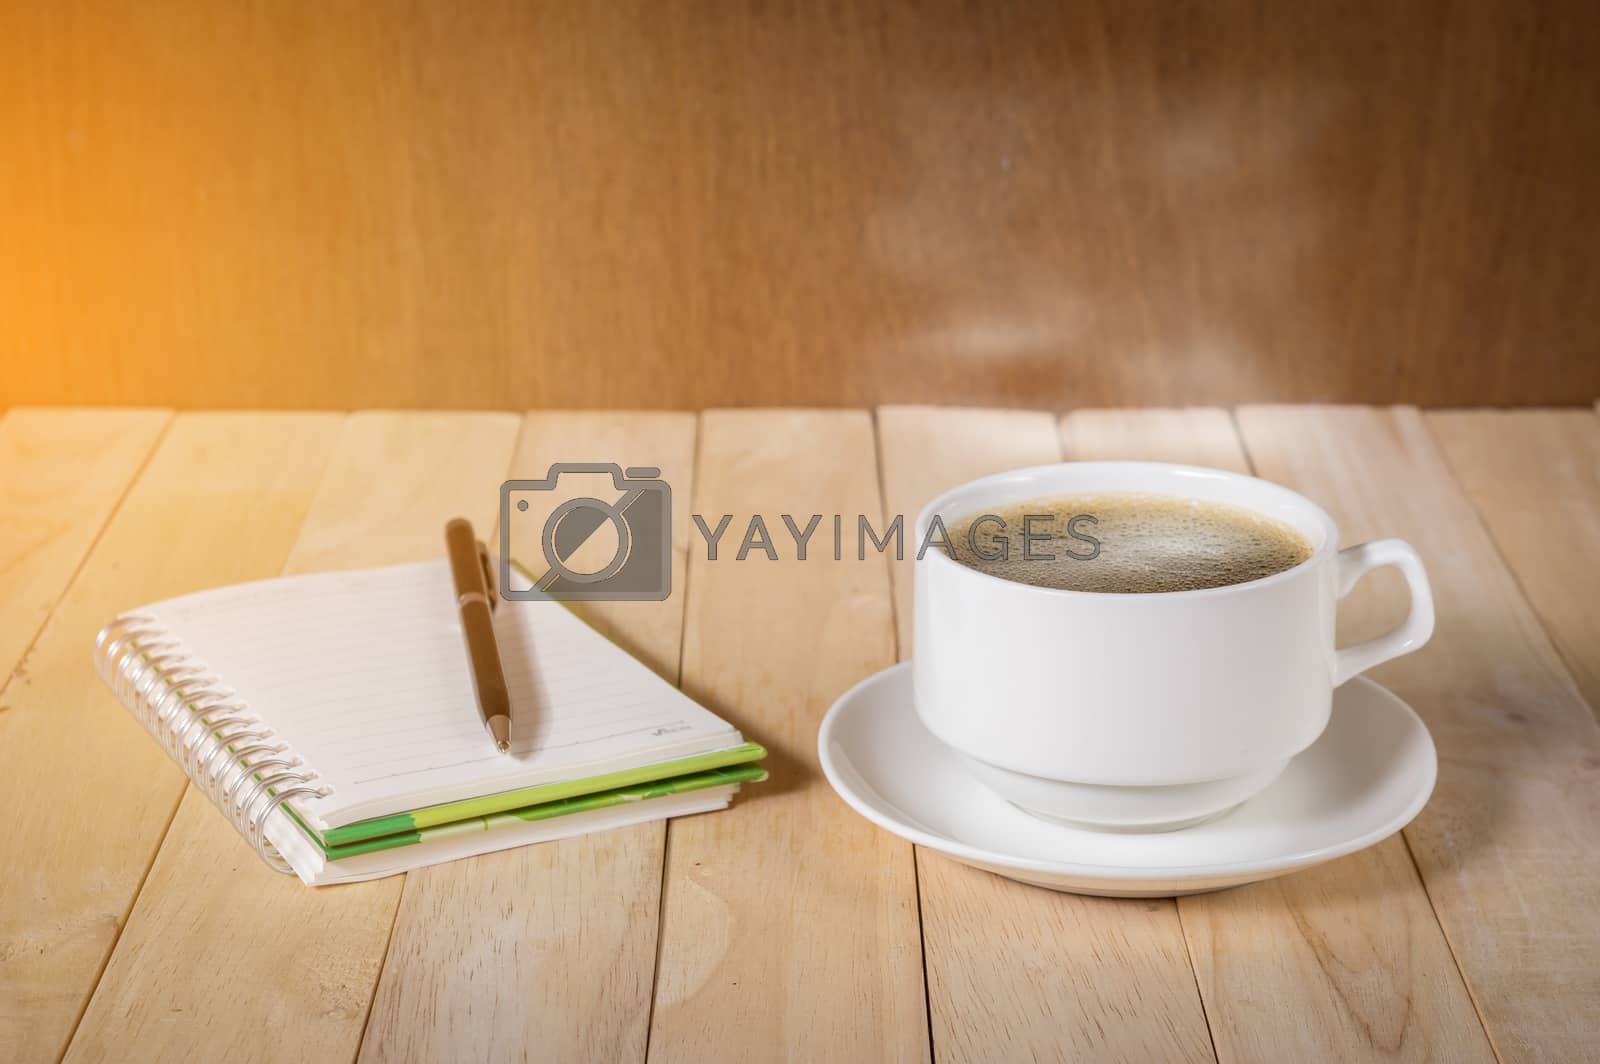 Royalty free image of warm cup of coffee. by seksan44